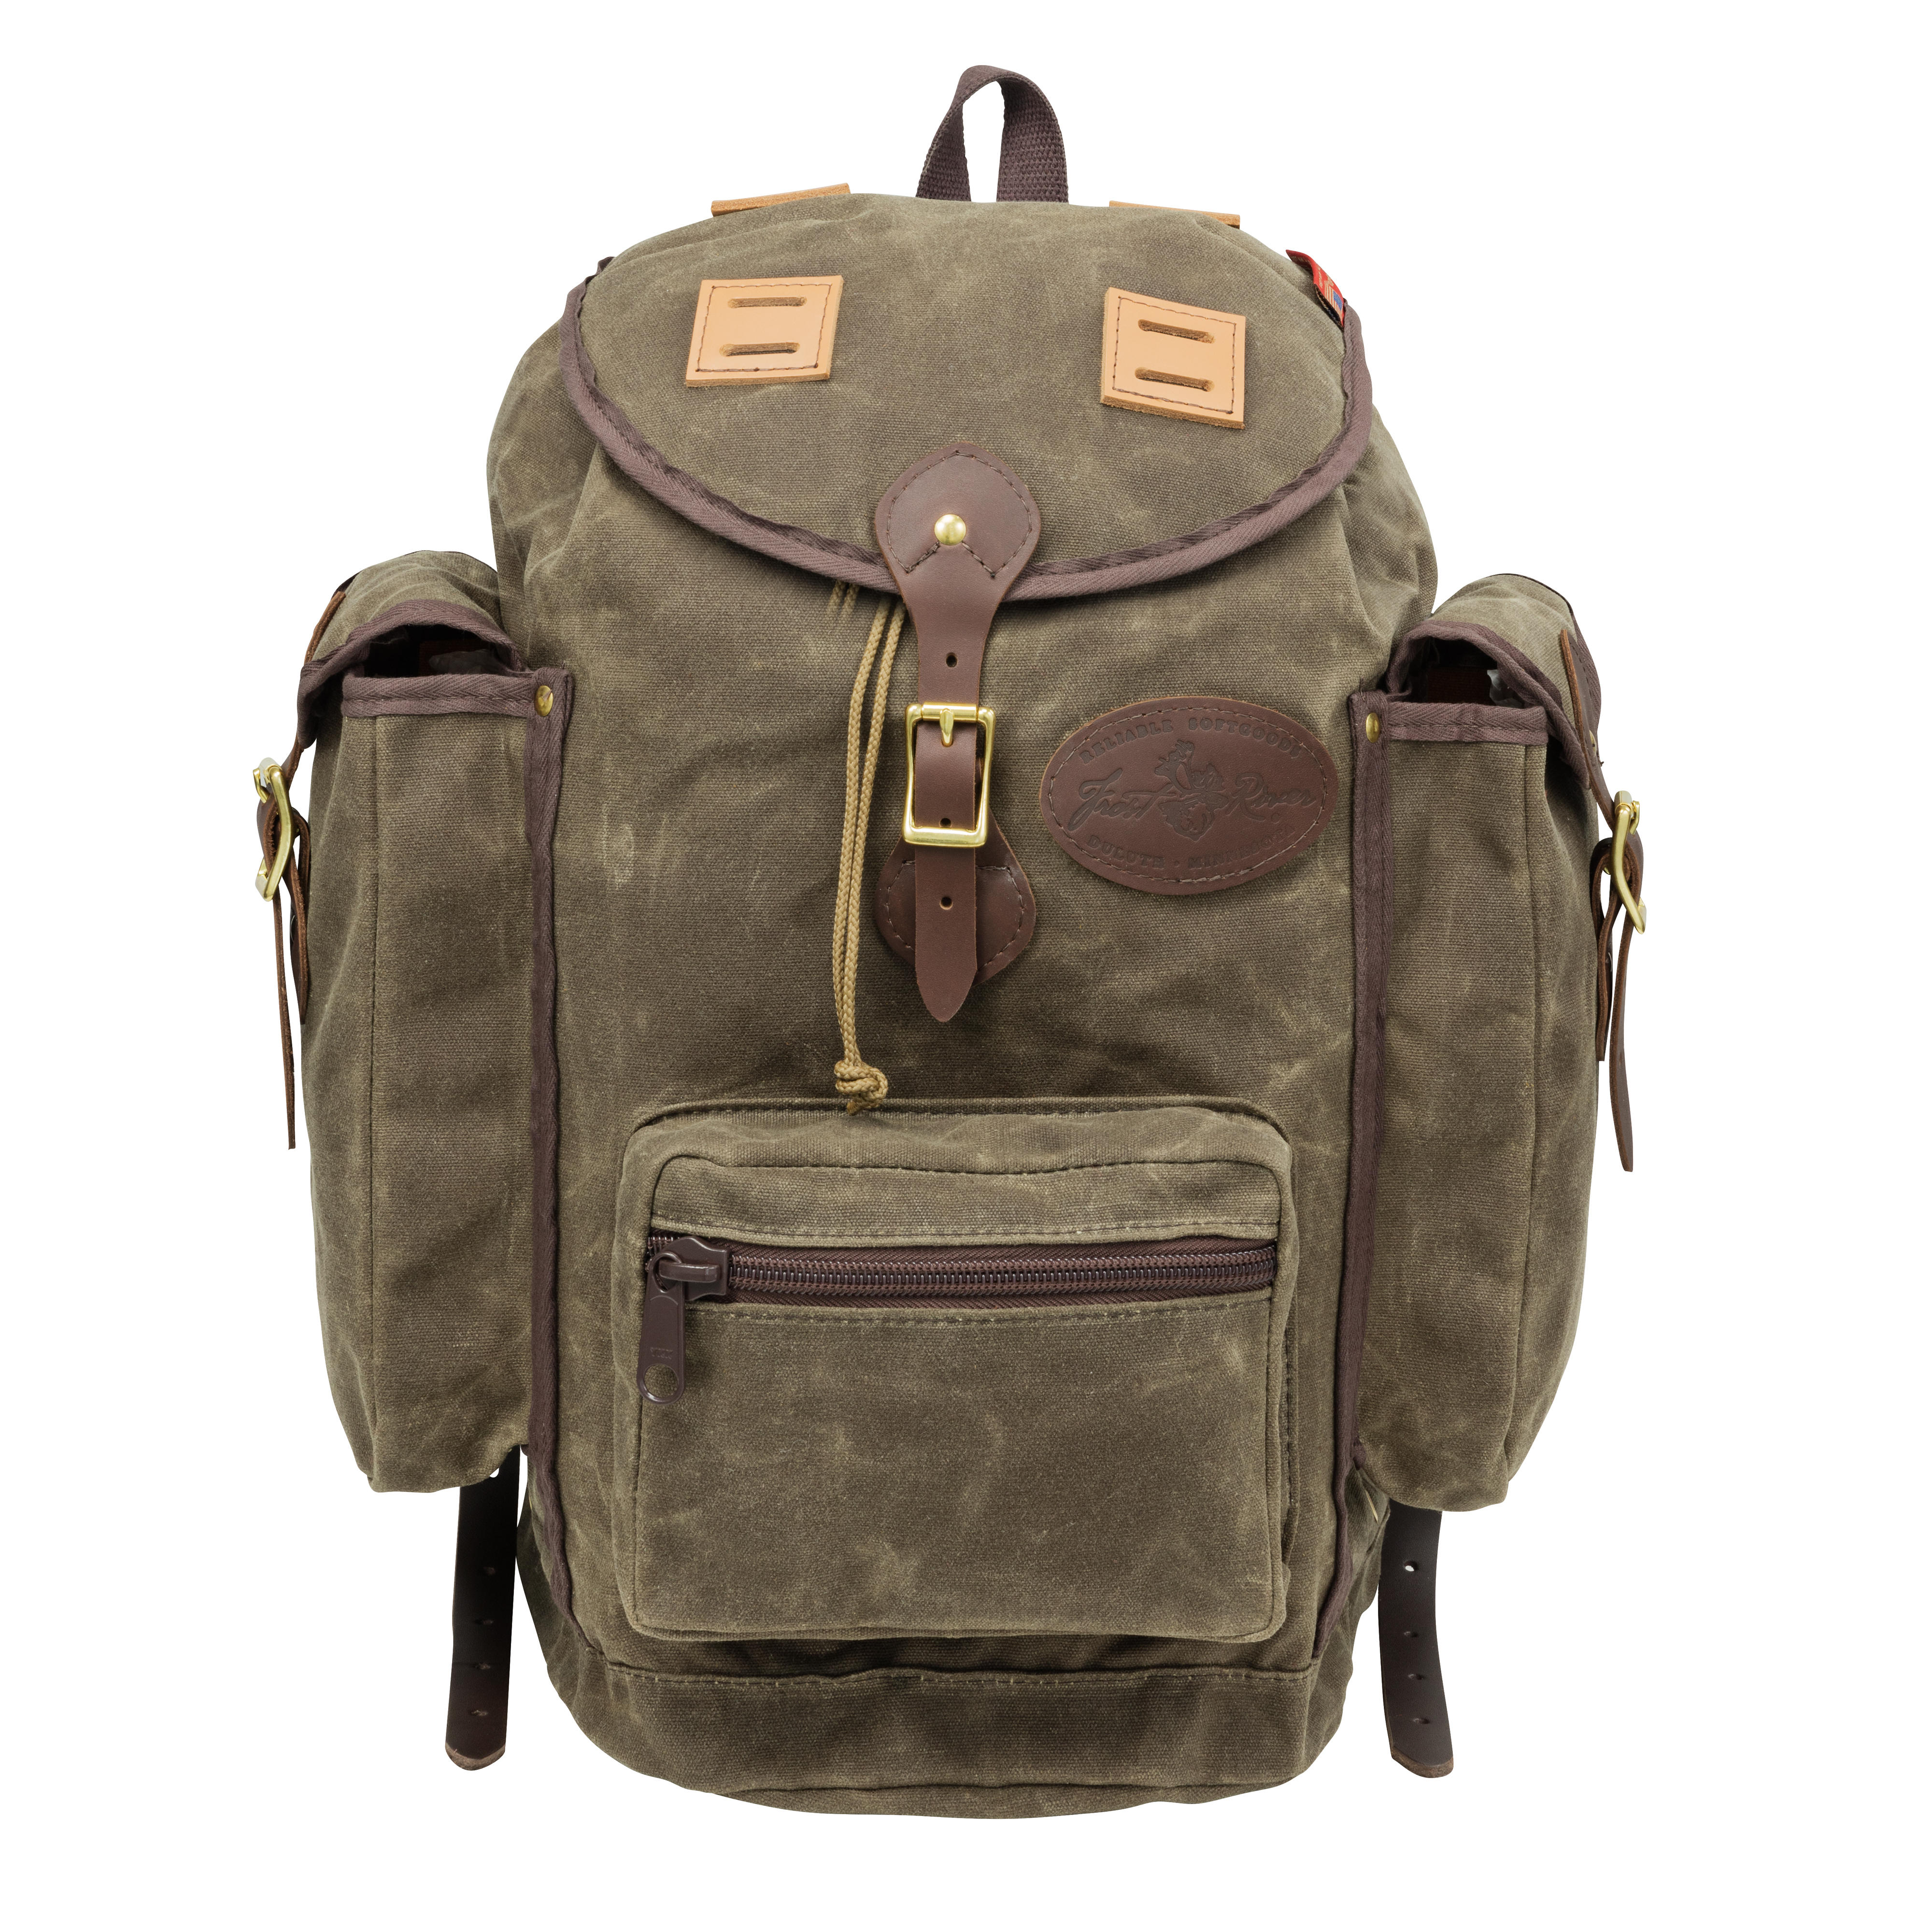 Frost River Expedition Backpack, with Padded Buckskin Straps, Dark Olive |  Backpacks & Bags | The GunDog Affair